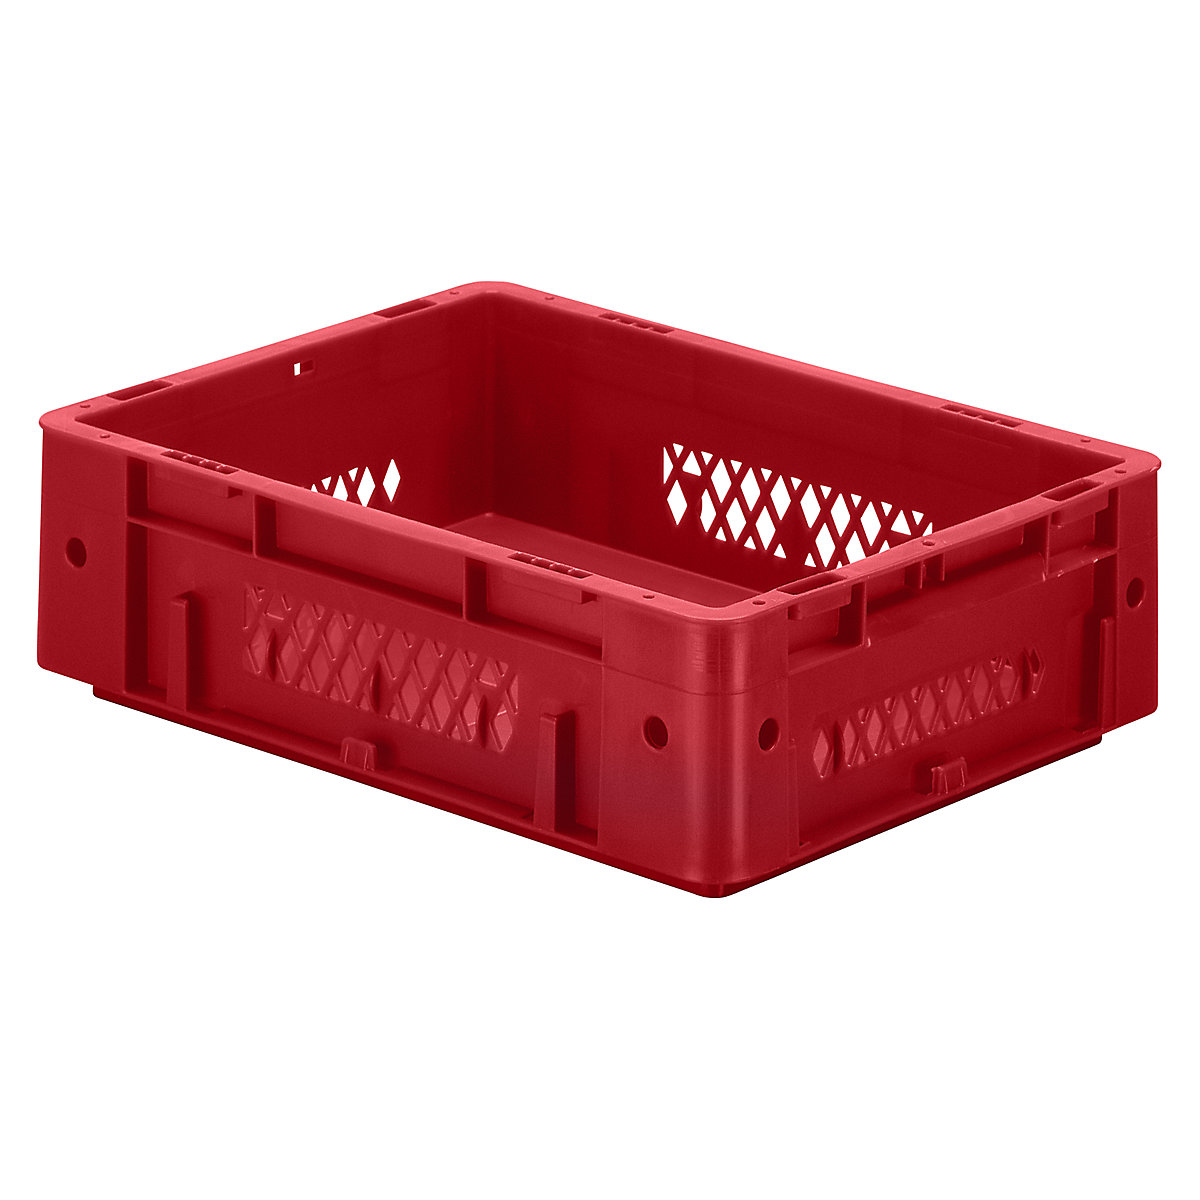 Heavy duty Euro container, polypropylene, capacity 9.2 l, LxWxH 400 x 300 x 120 mm, perforated walls, solid base, red, pack of 4